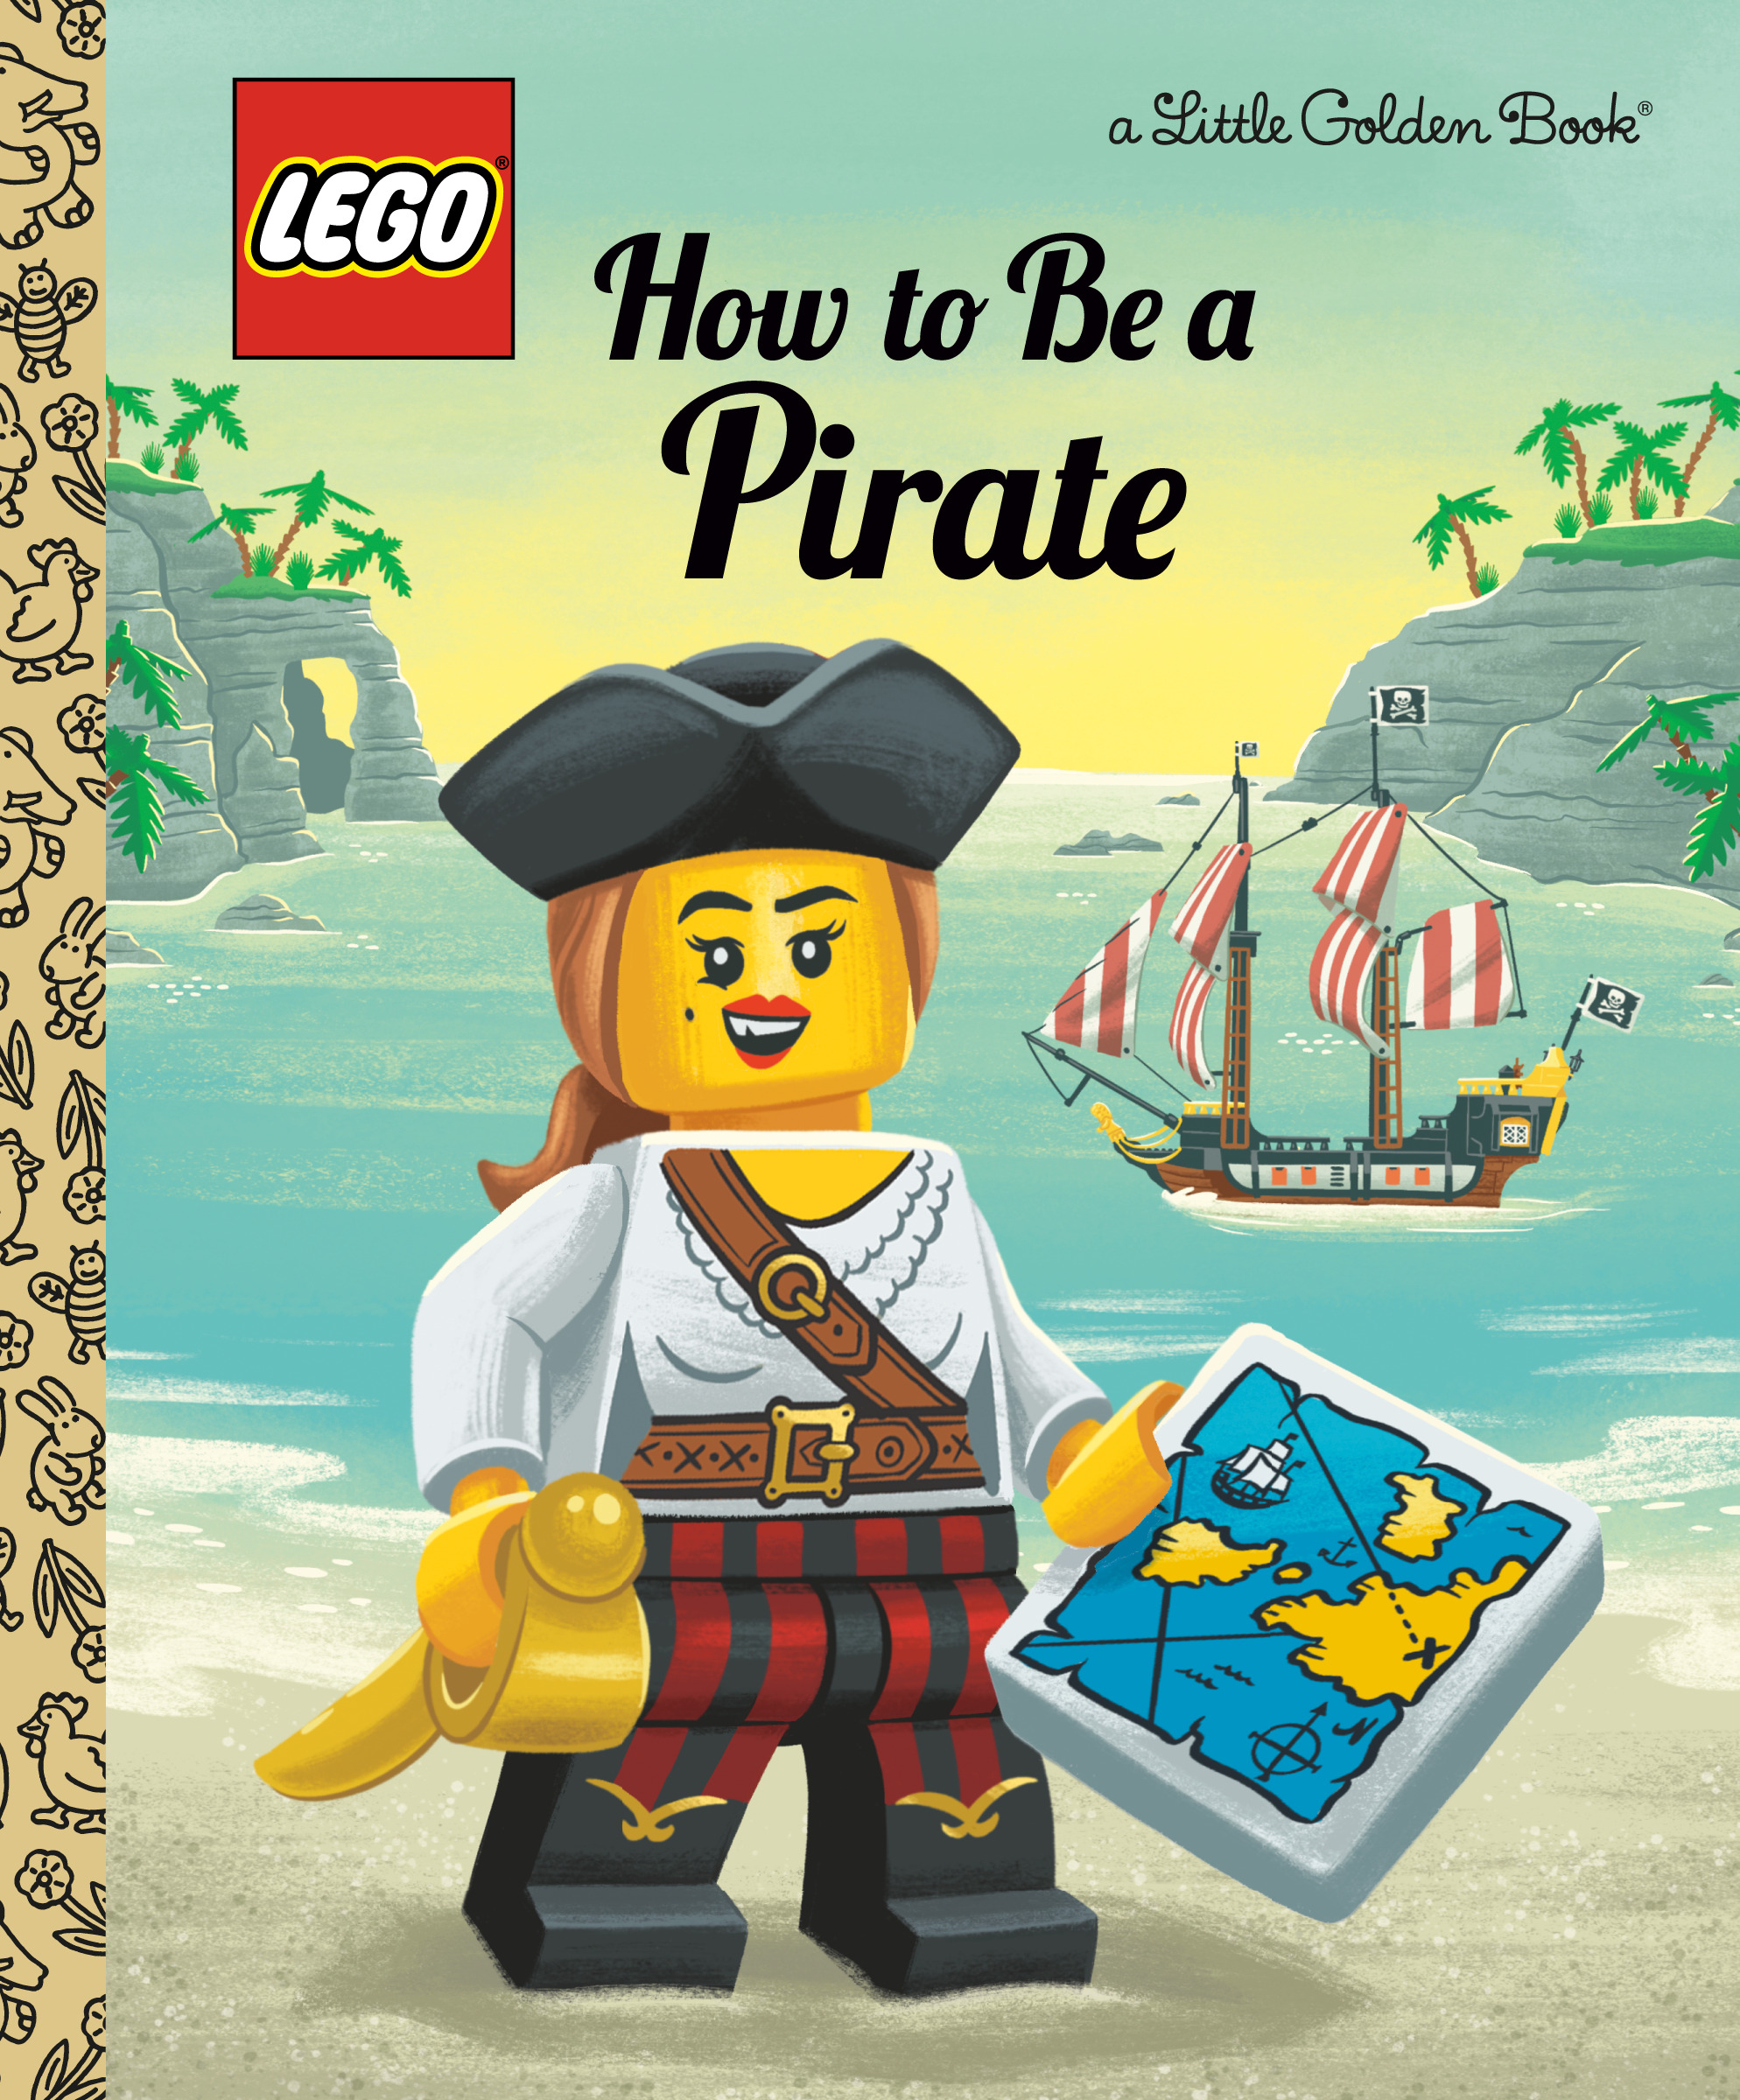 How to Be a Pirate (LEGO) | Johnson, Nicole